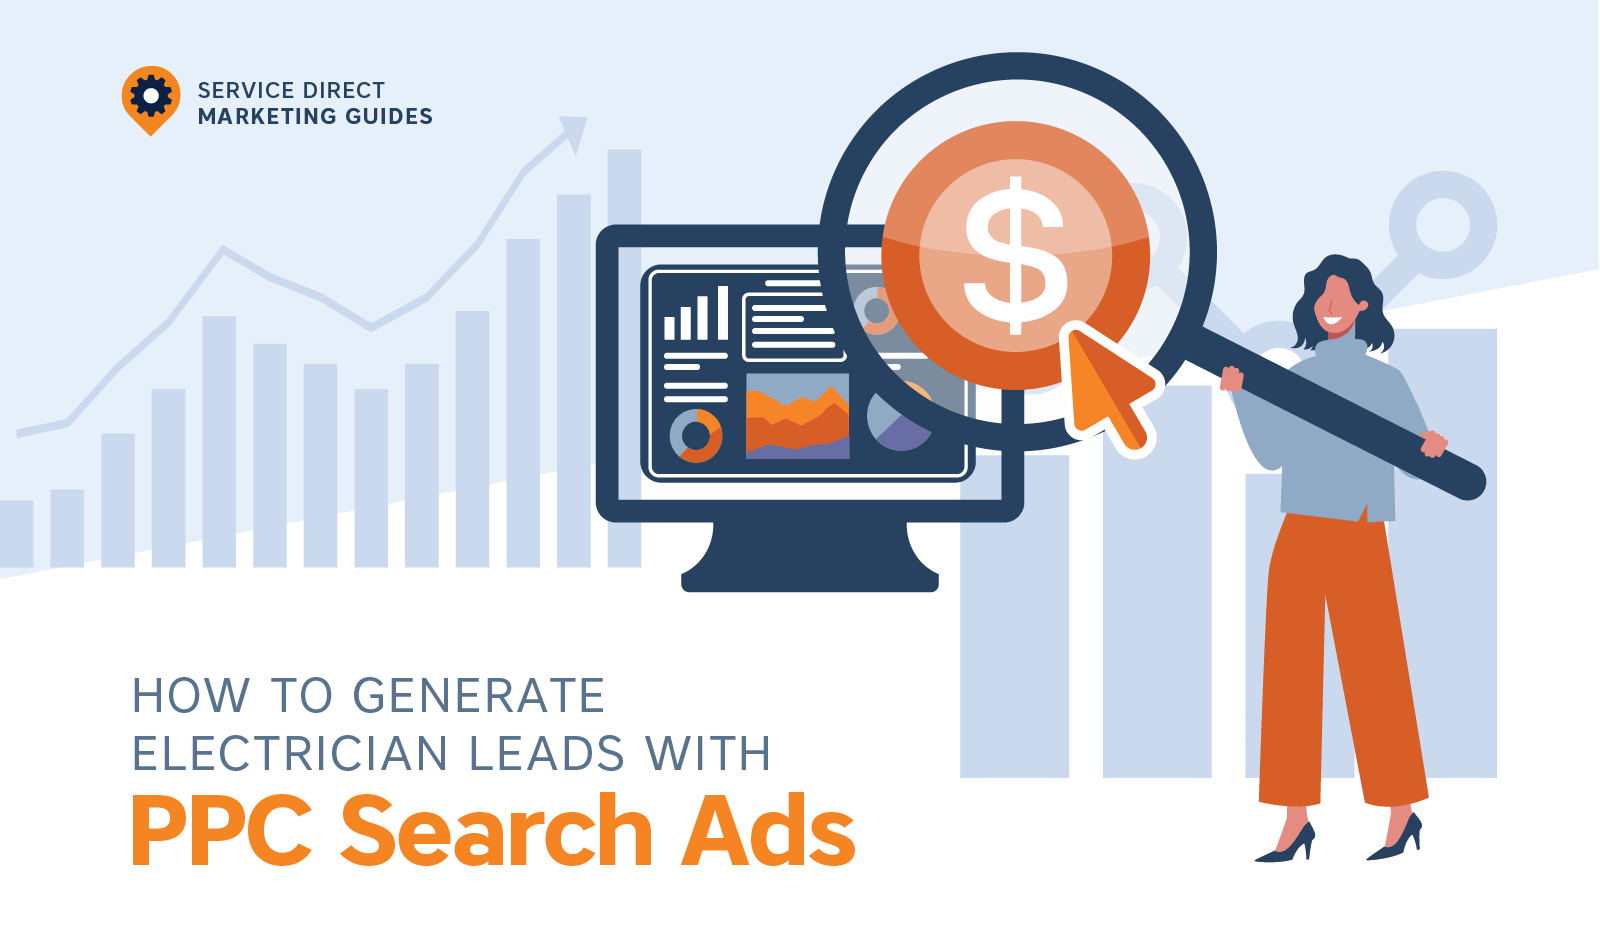 How To Generate Electrician Leads With PPC Search Ads